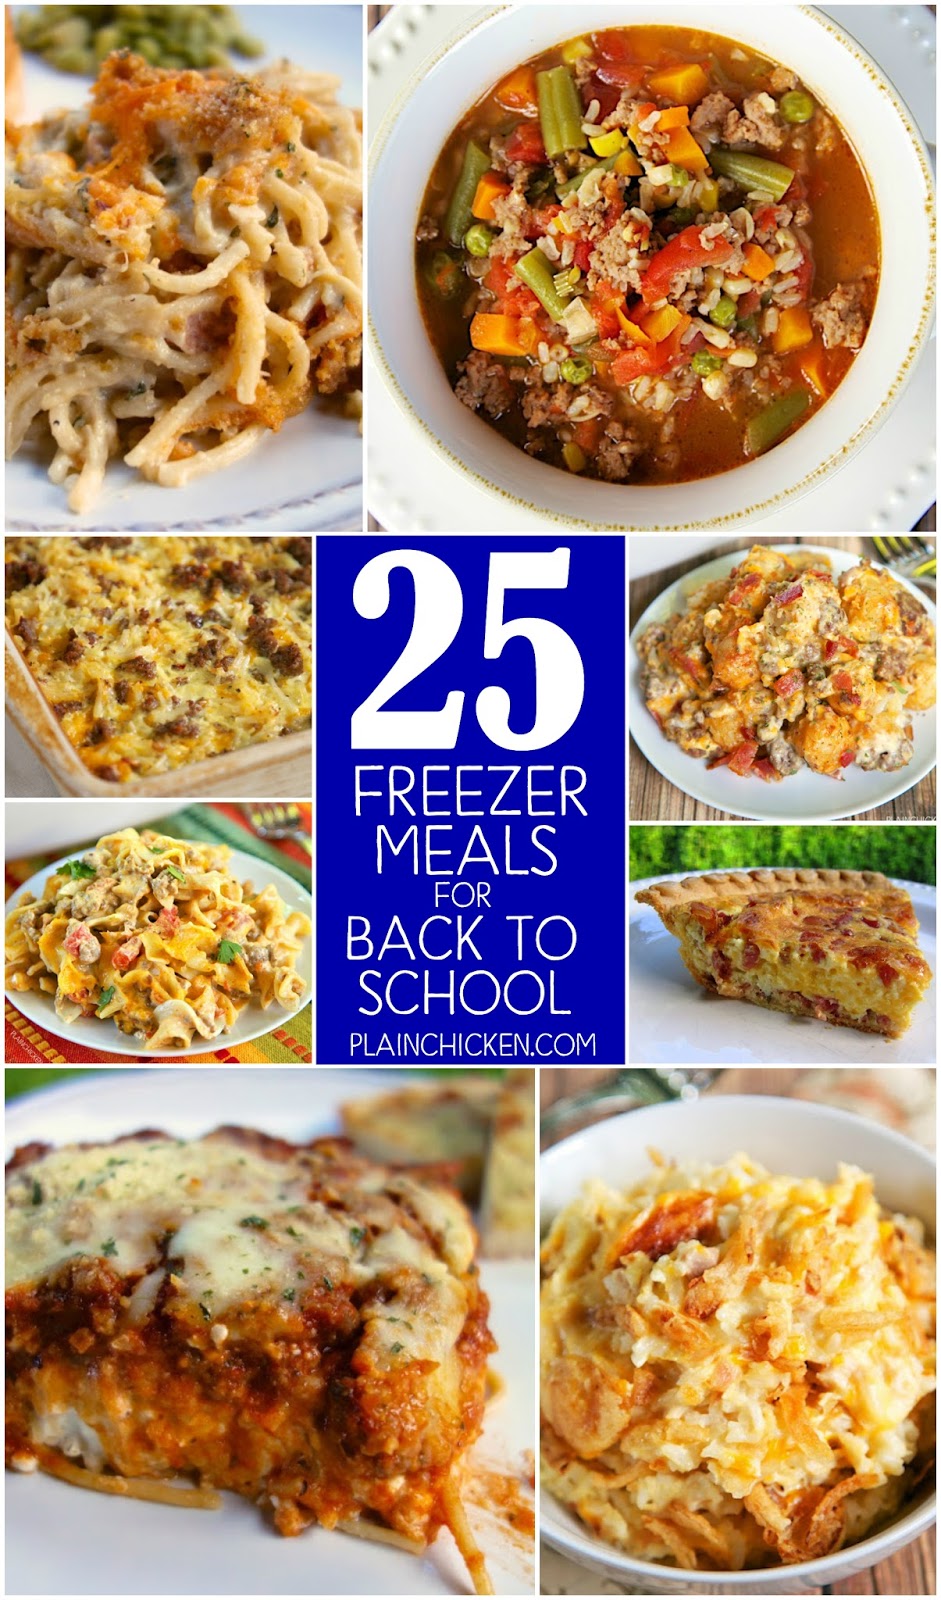 25 Freezer Meals for Back to School | Plain Chicken®